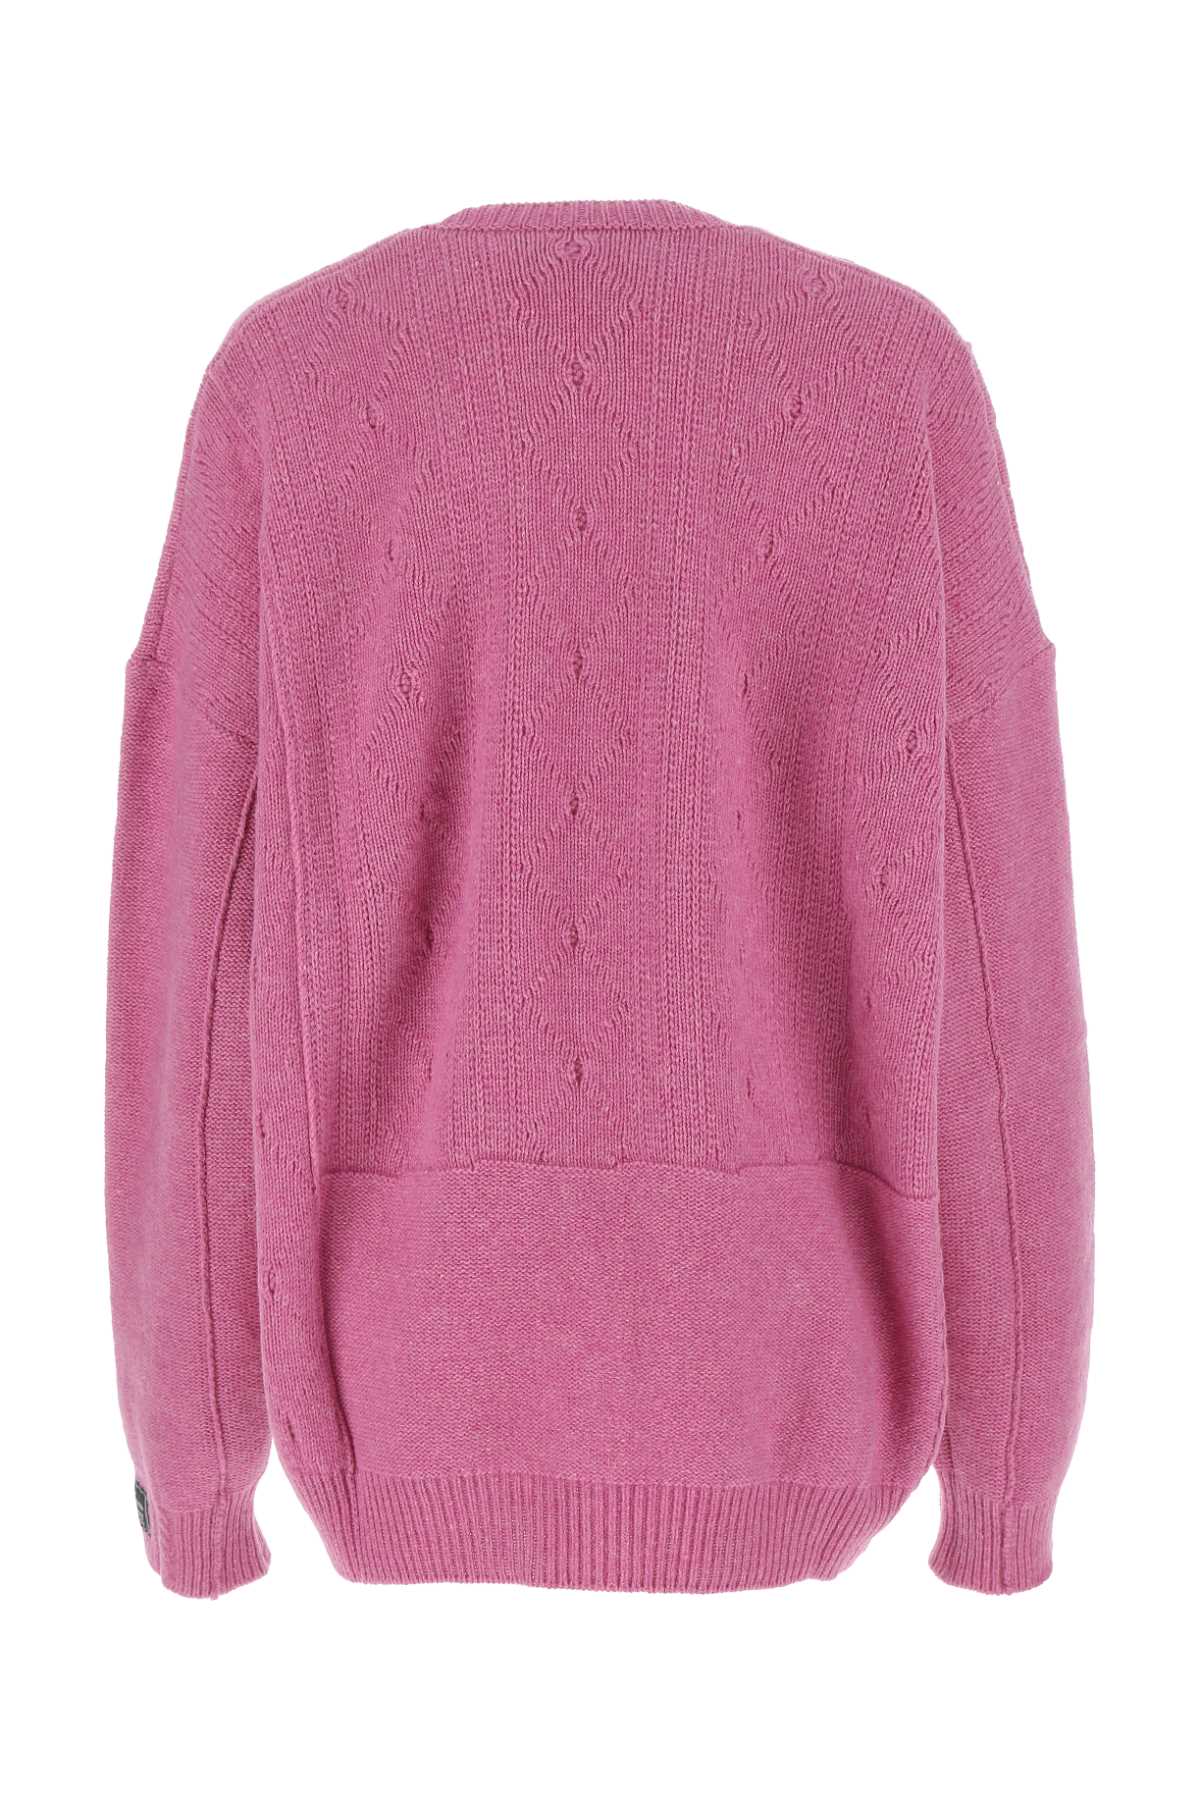 Raf Simons Pink Wool Oversize Sweater In 0059